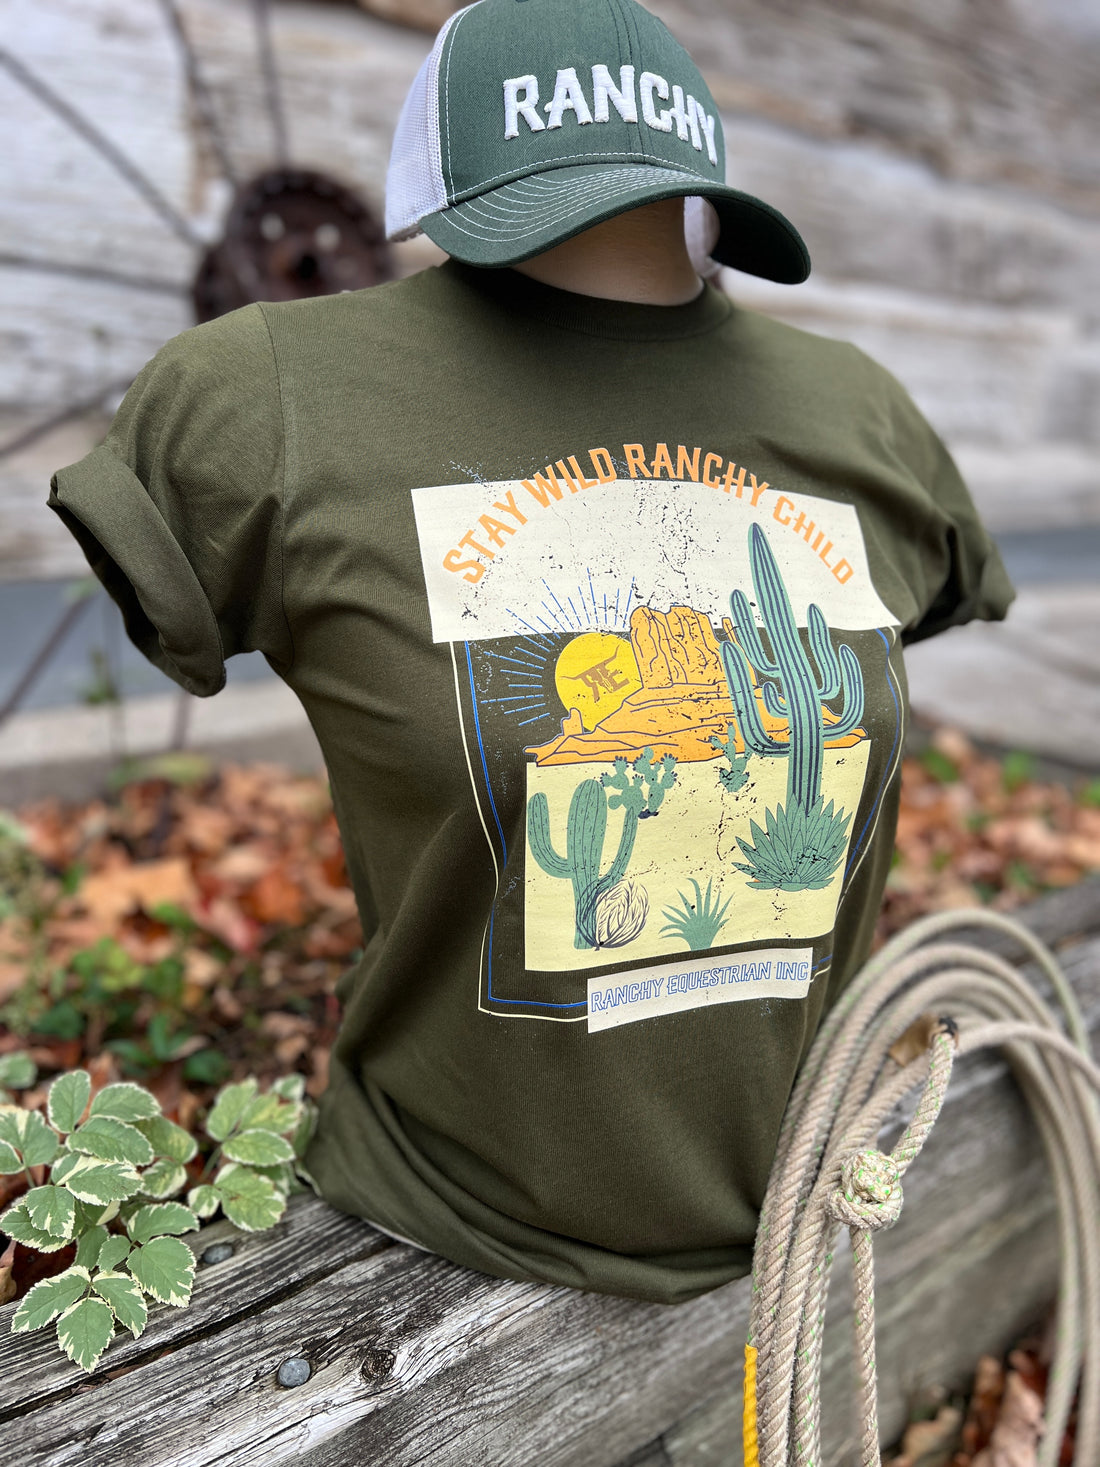 &quot;Stay Wild Ranchy Child&quot; Tee Shirt